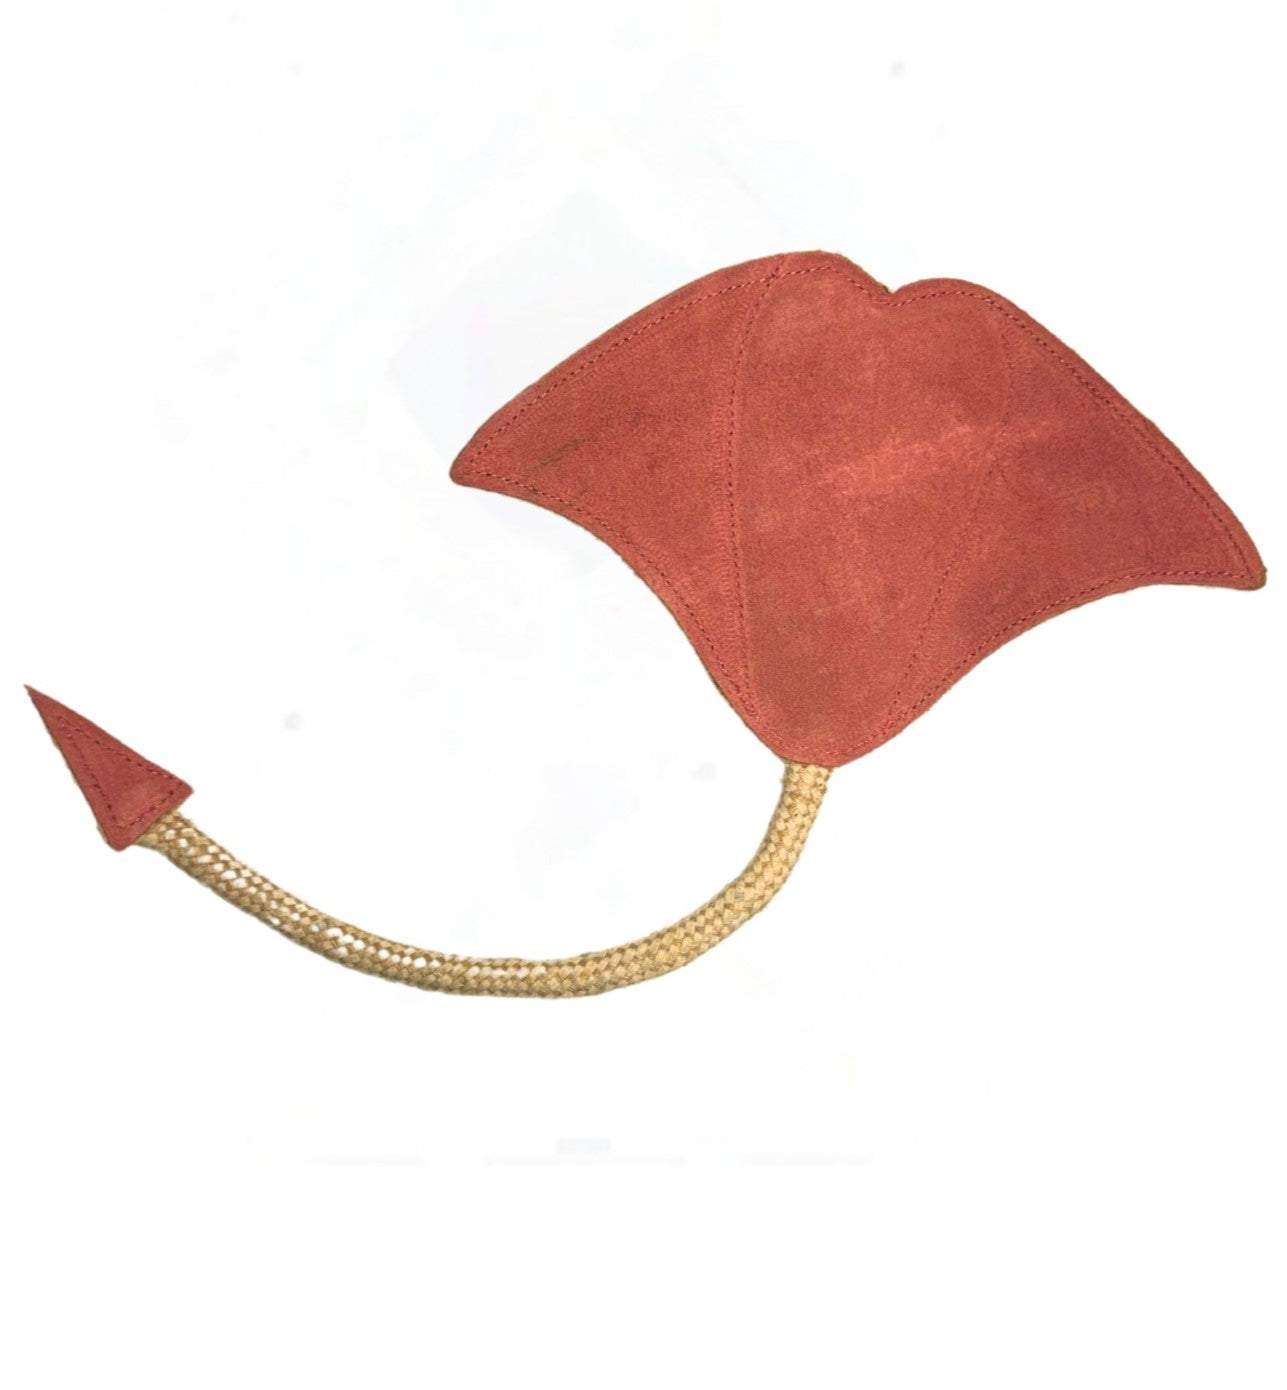 A whimsical Simon the Stingray - chalk hat with a long, pointed tail and buffalo suede trim, resembling a stylized depiction of a devil or imp, floats against a white background, evoking a playful or costume atmosphere by Georgie Paws.